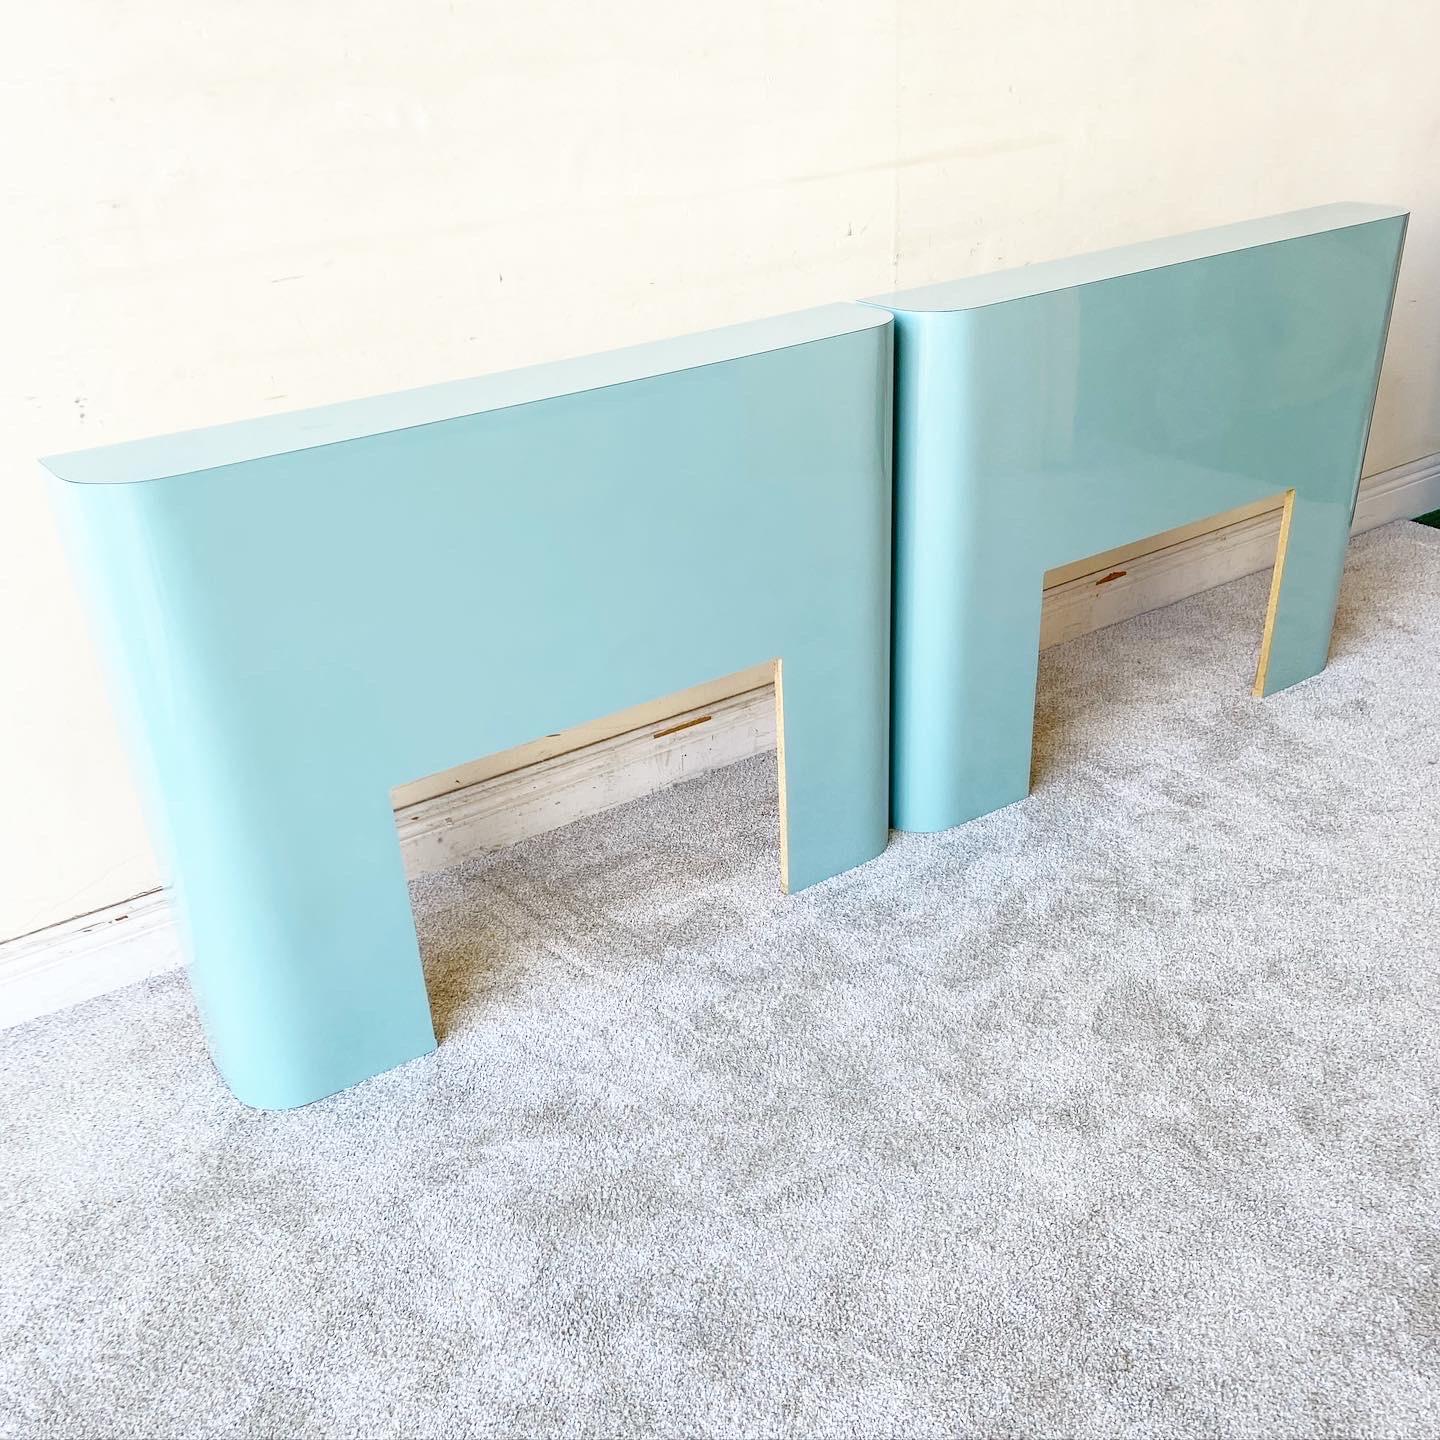 Exceptional pair of 1980s vintage postmodern twin size headboard. Each feature an aqua blue lacquer laminate. Can be put together as a king size.